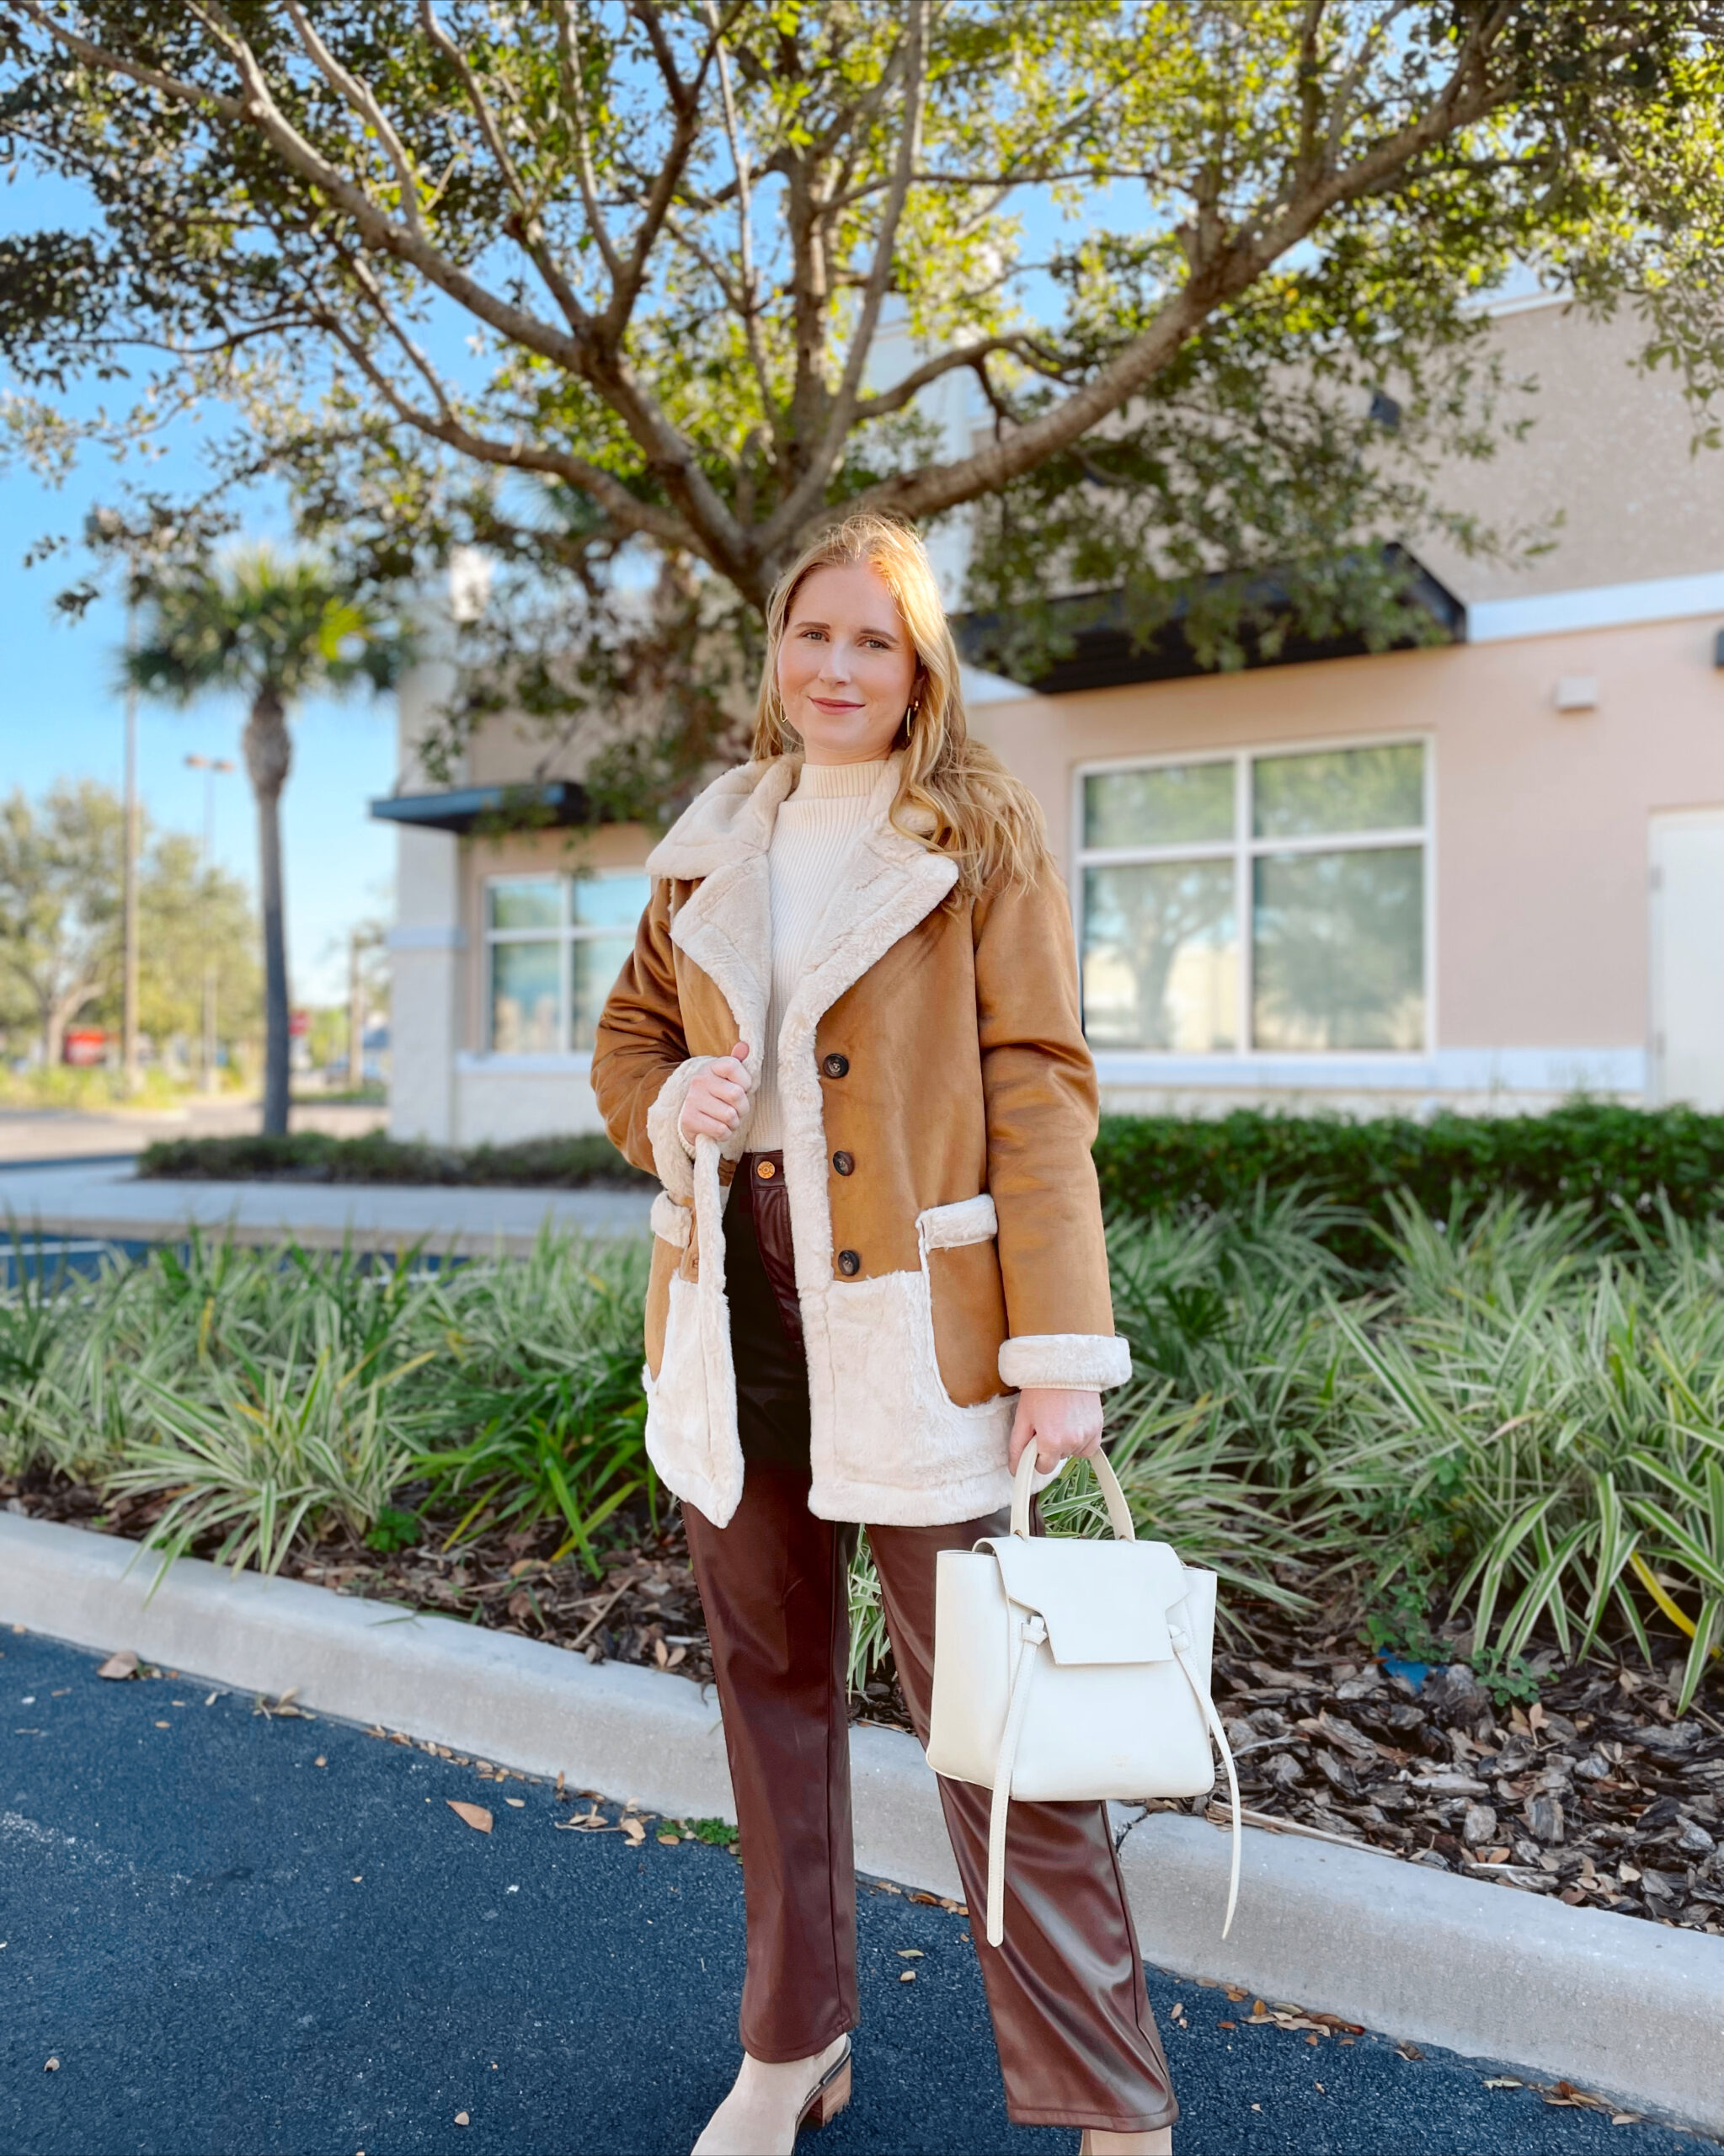 Fall Outfit Ideas - Affordable by Amanda